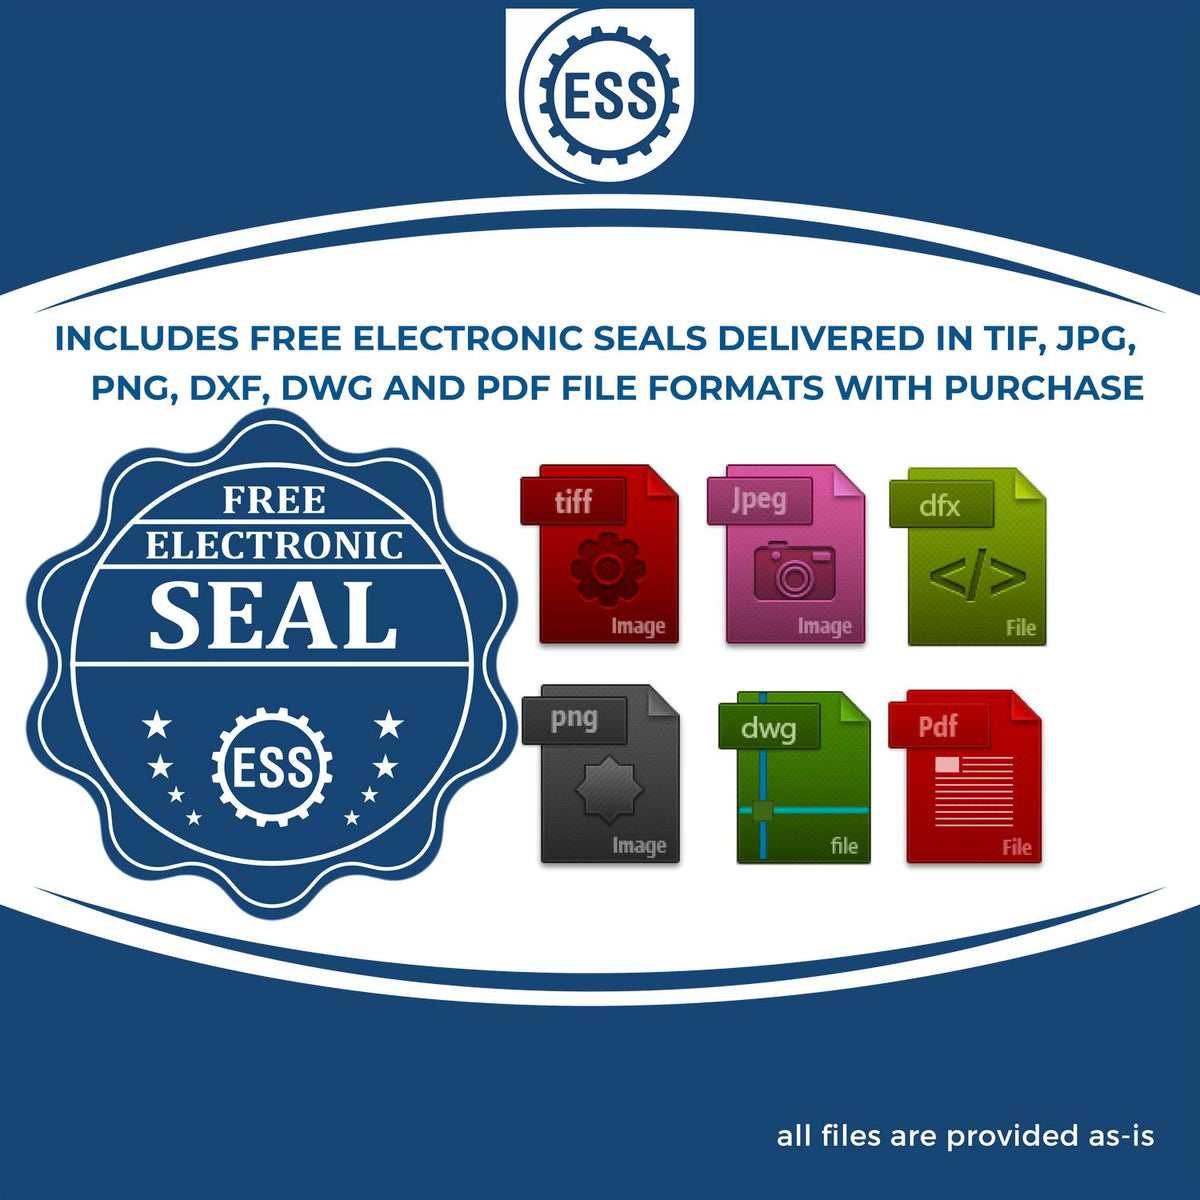 An infographic for the free electronic seal for the Premium MaxLight Pre-Inked Minnesota Engineering Stamp illustrating the different file type icons such as DXF, DWG, TIF, JPG and PNG.